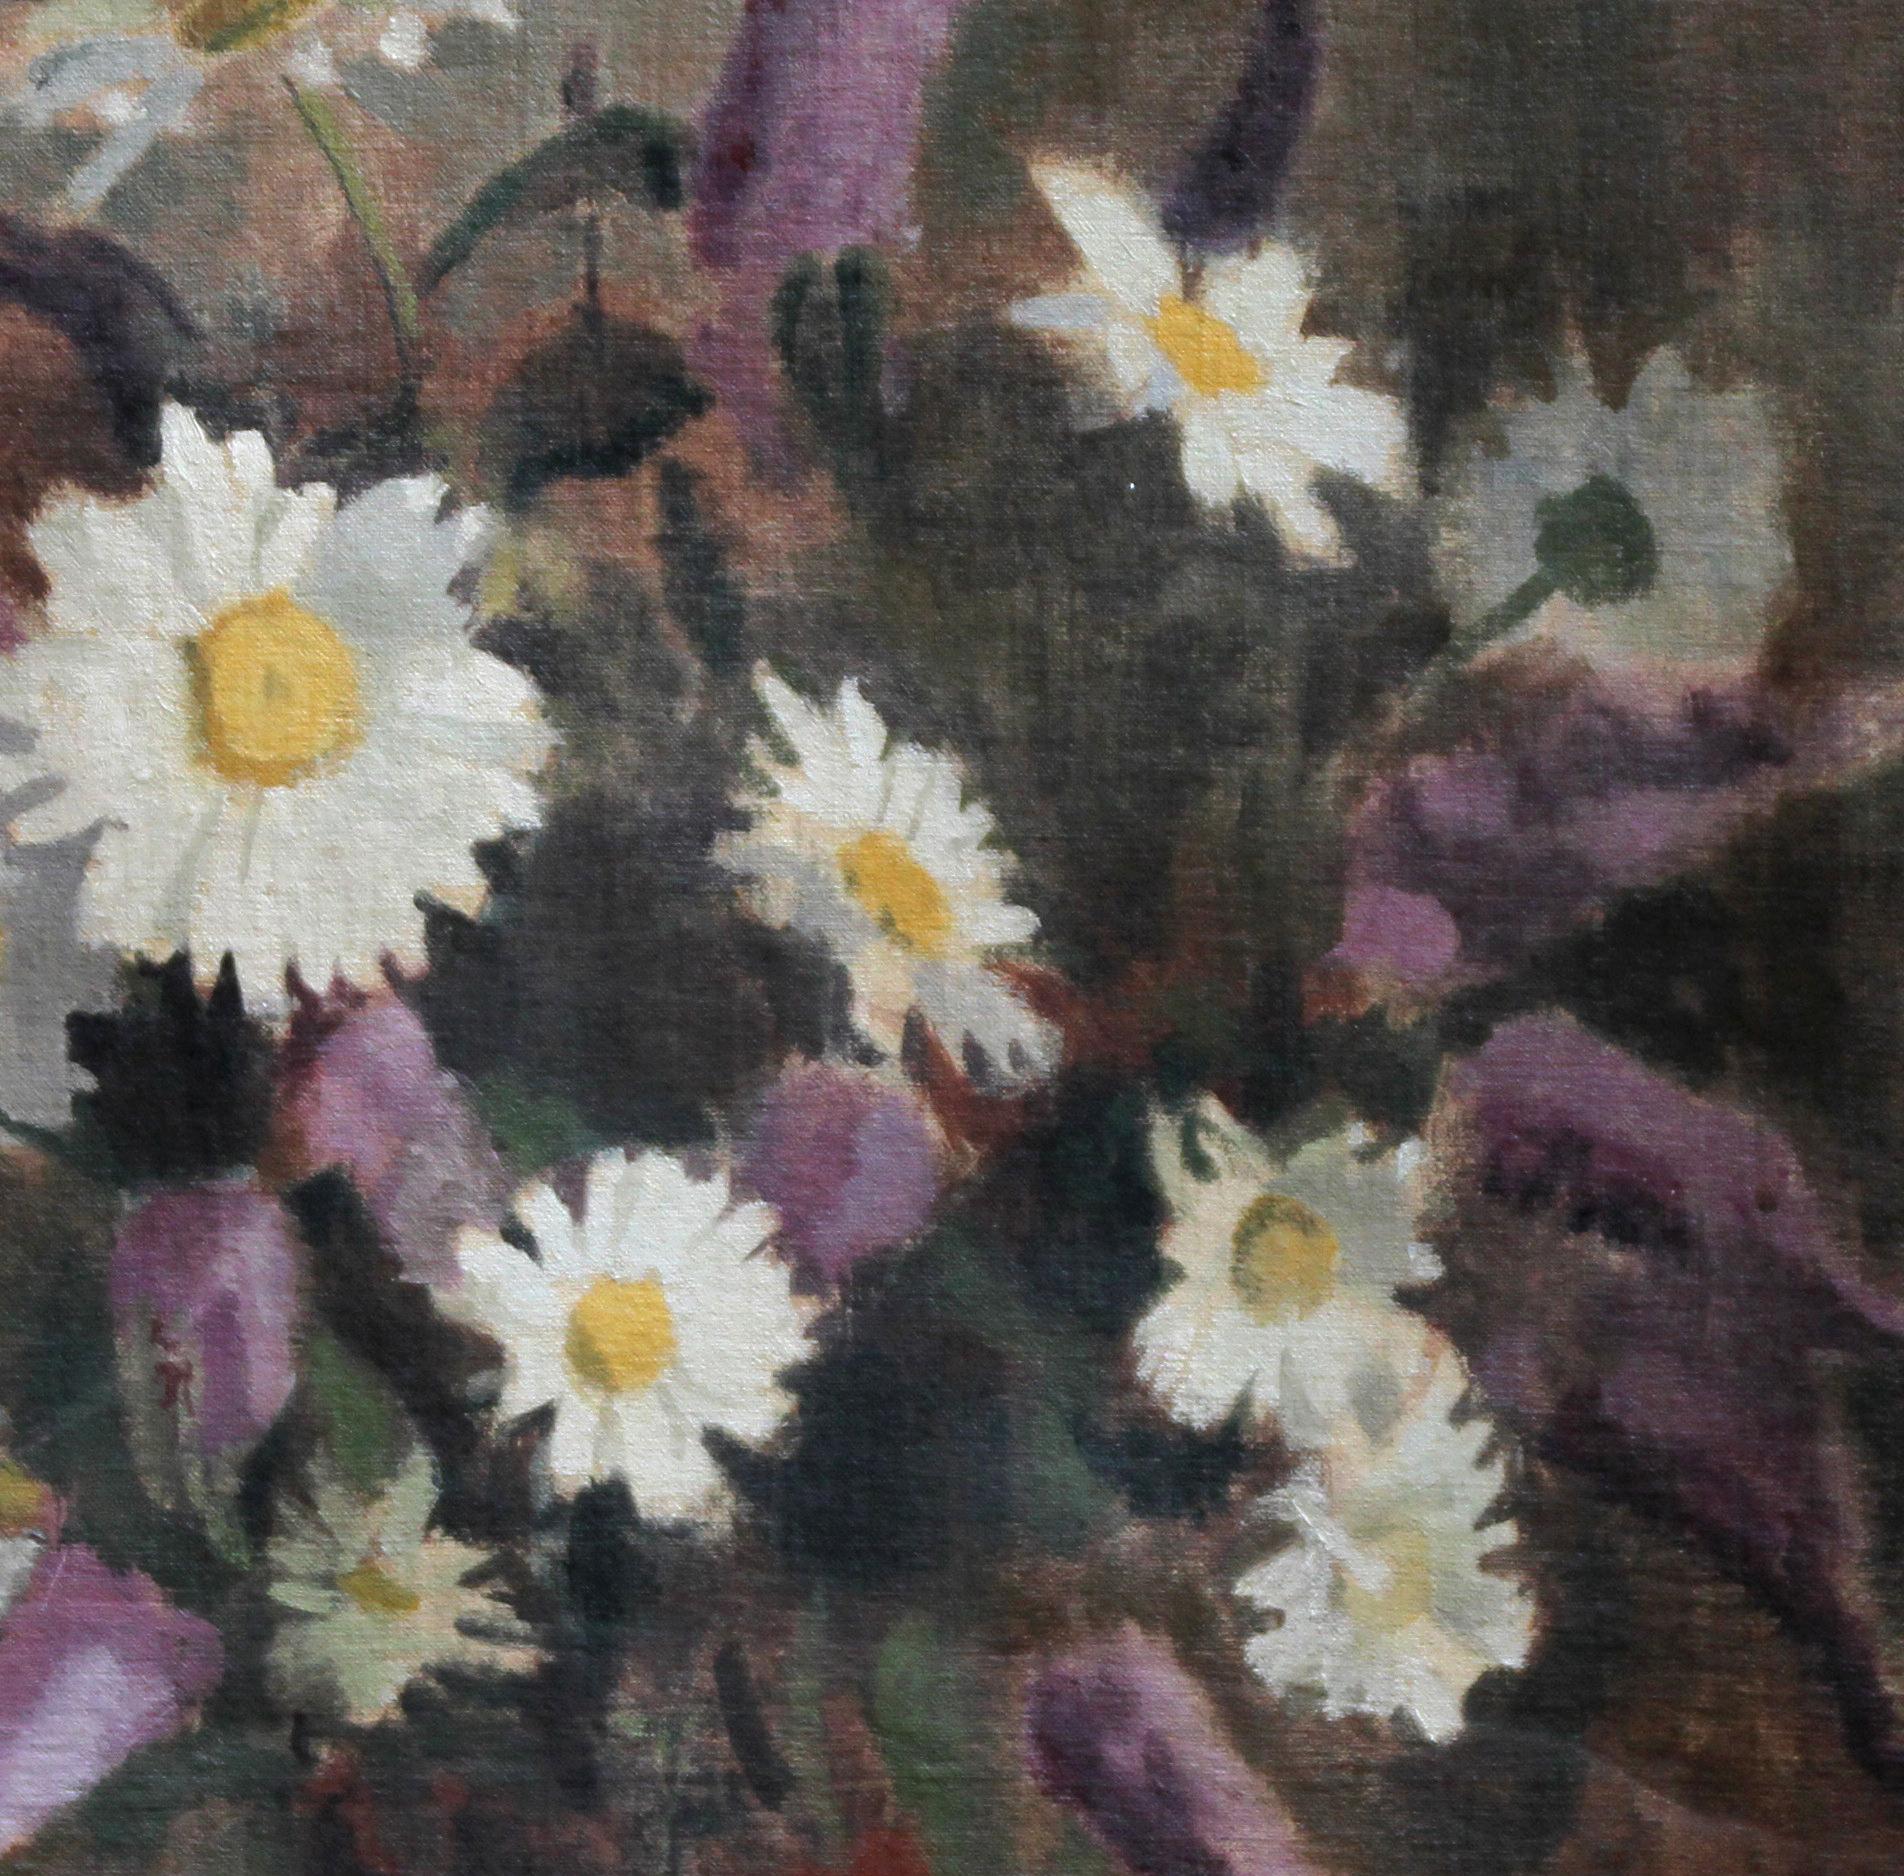 This lovely floral oil painting is by British artist Amy Constance Reeve Fowlkes who exhibited throughout her career. Painted in 1940, this stunning oil is a bold arrangement of daisies in an Impressionist palette and an expressive delight. A very